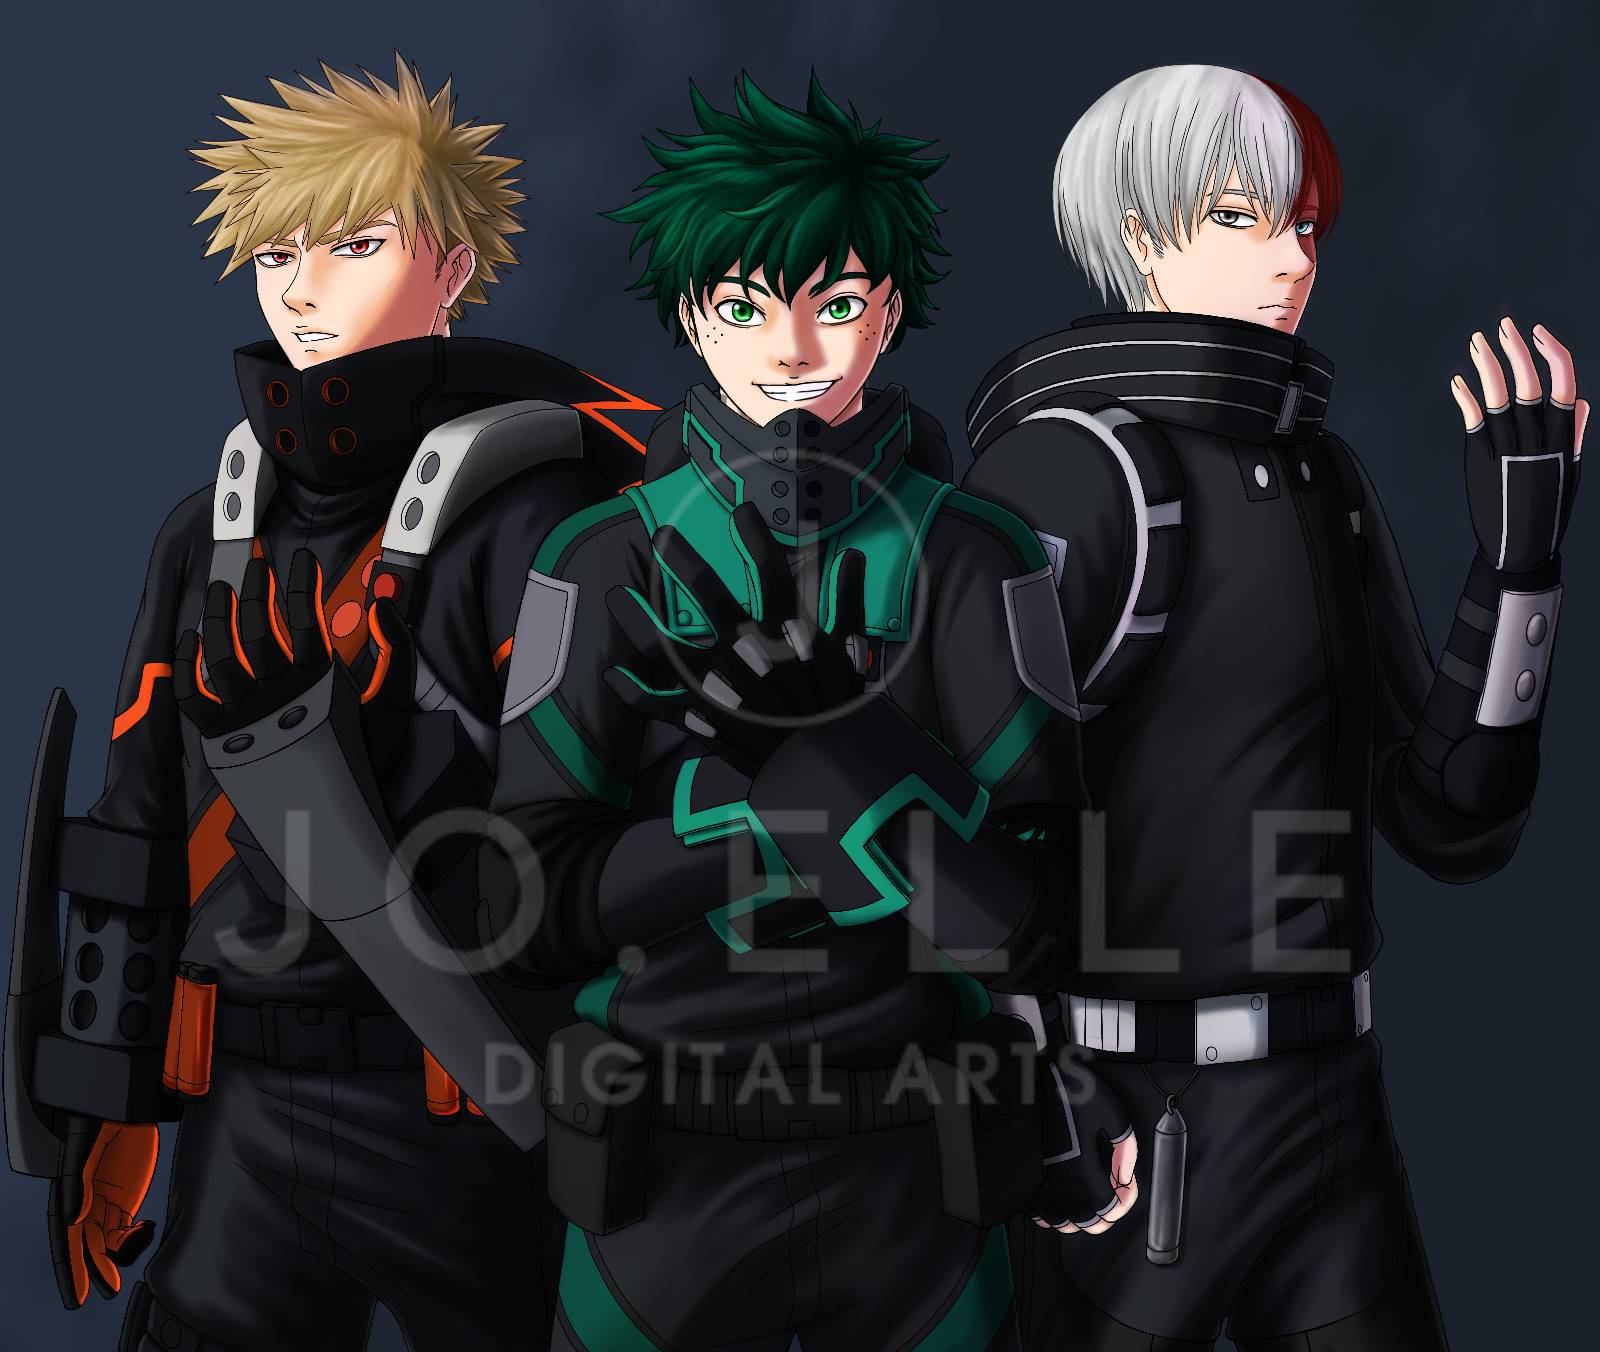 My Hero Academia: World Heroes' Mission Film Stealth Costumes Go